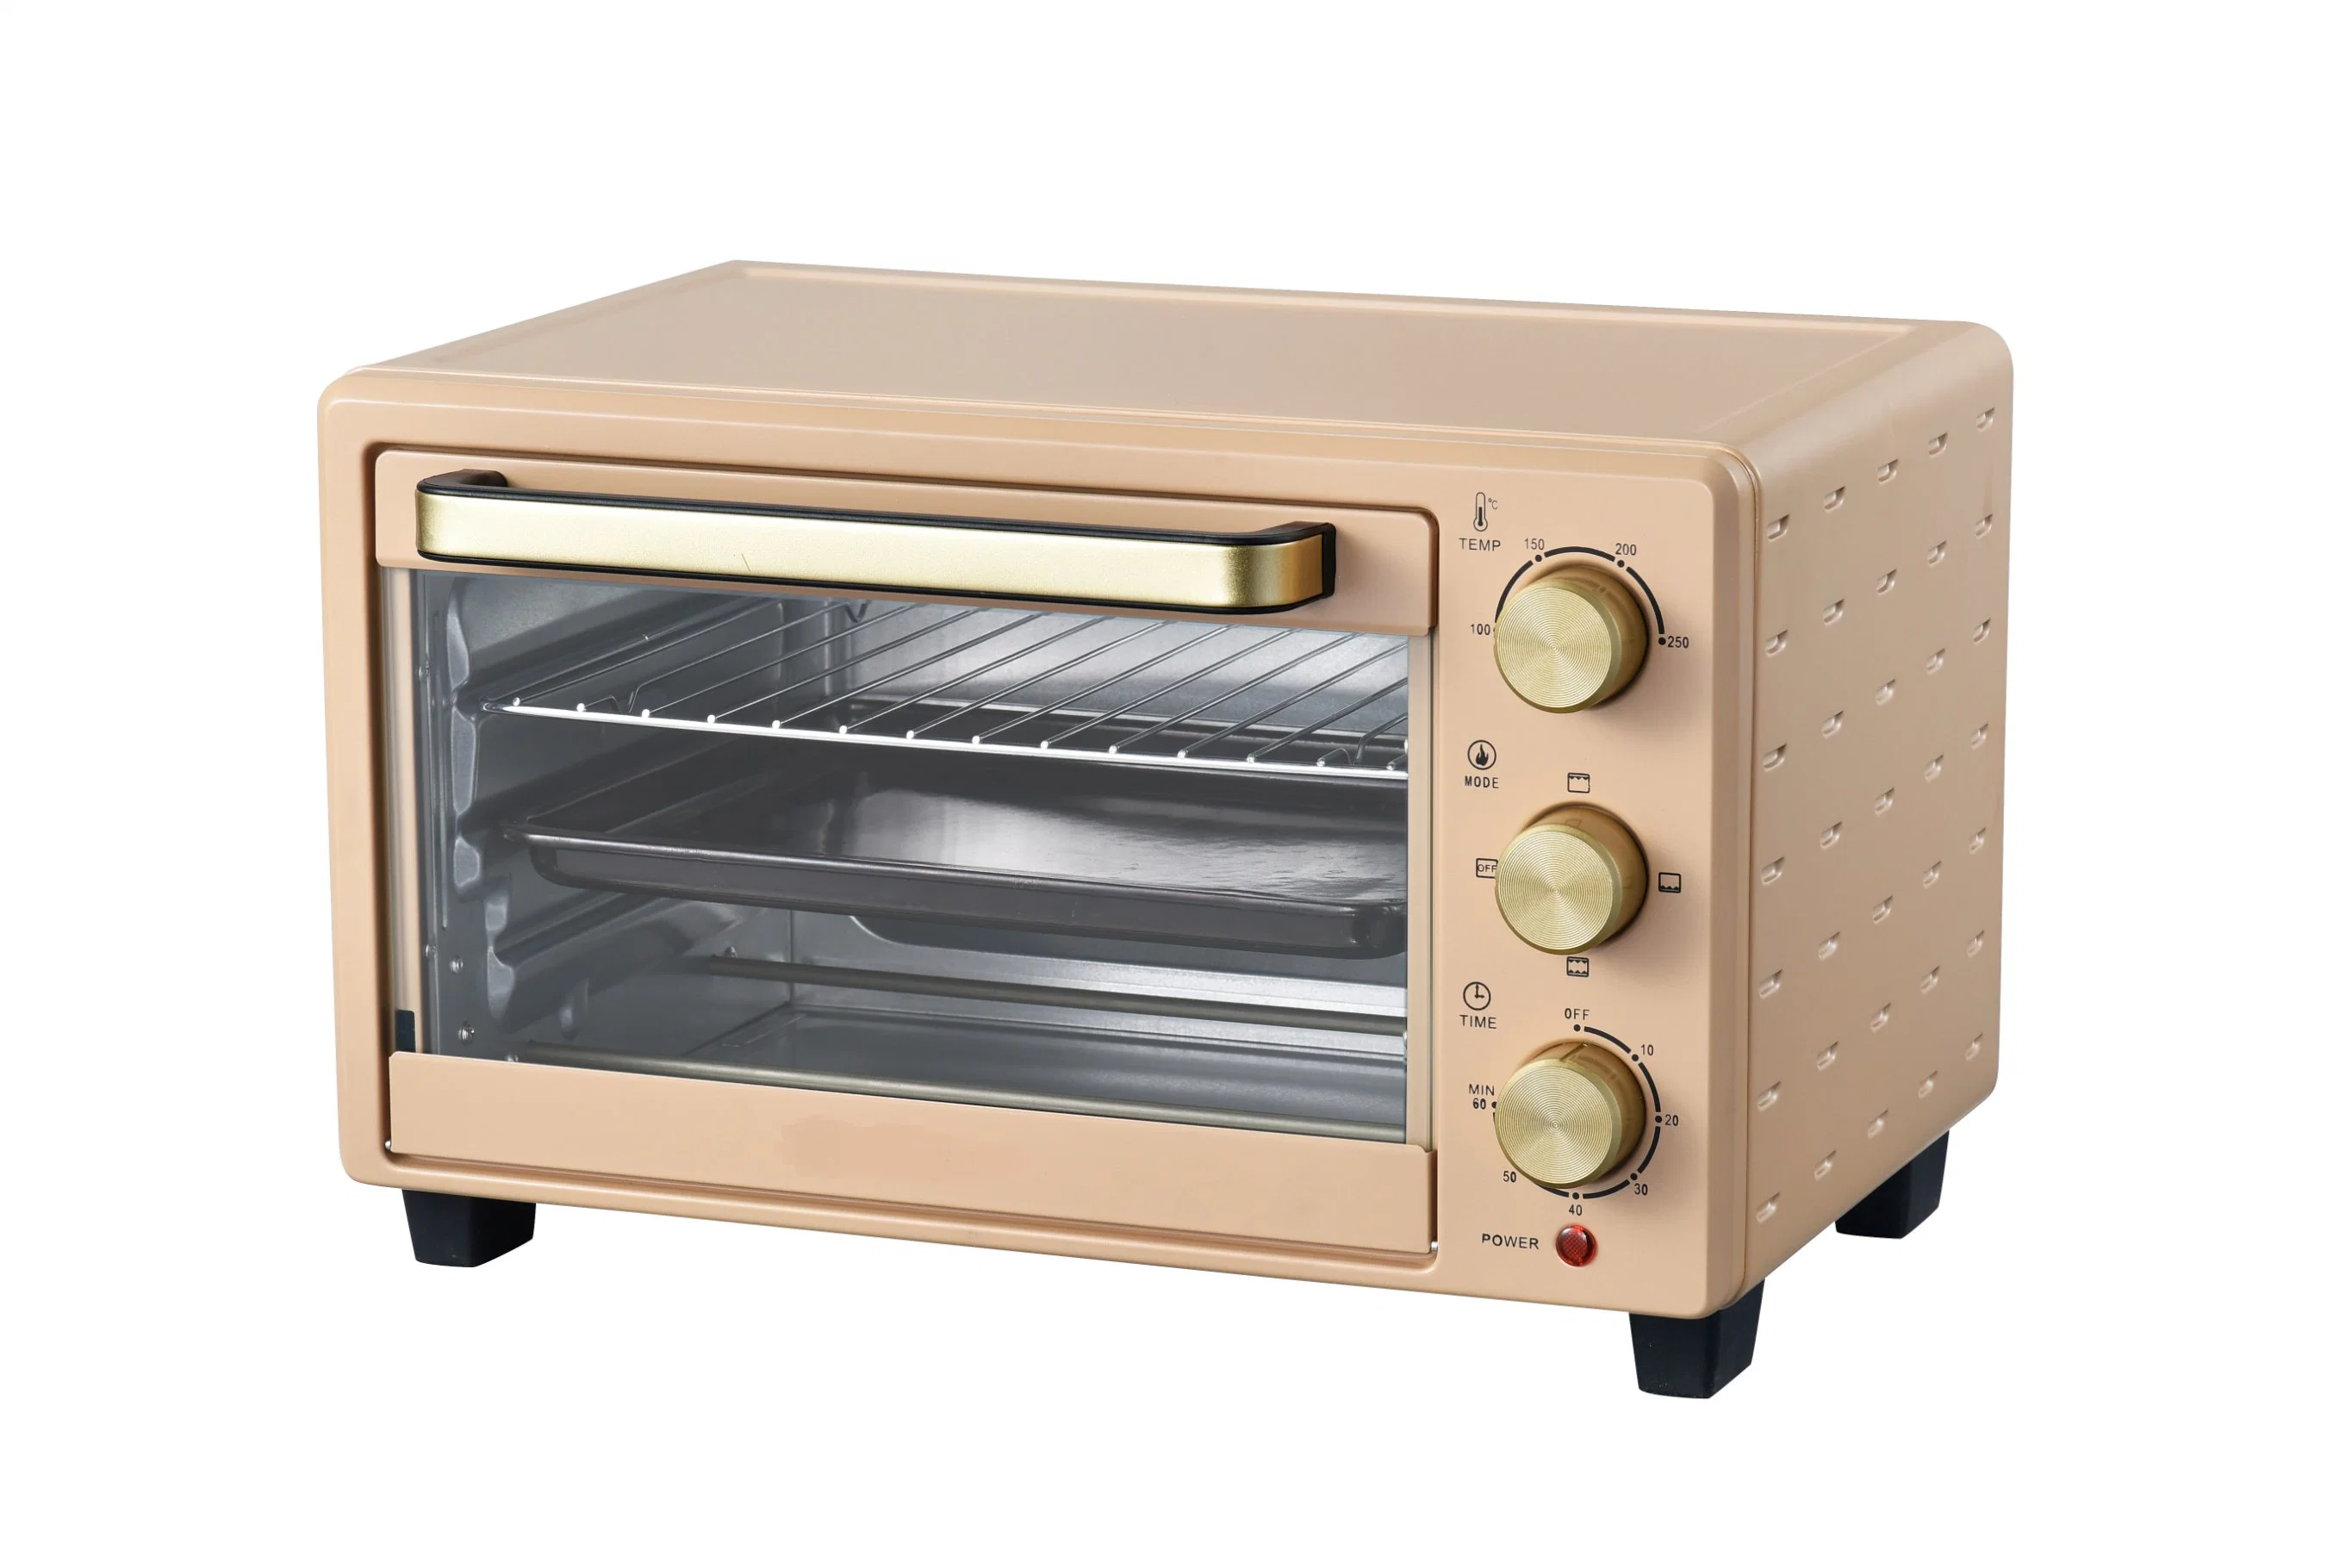 1400W 21L Home Appliances Baking Chicken Roasted Pizza Rotisserie Electric Toaster Oven